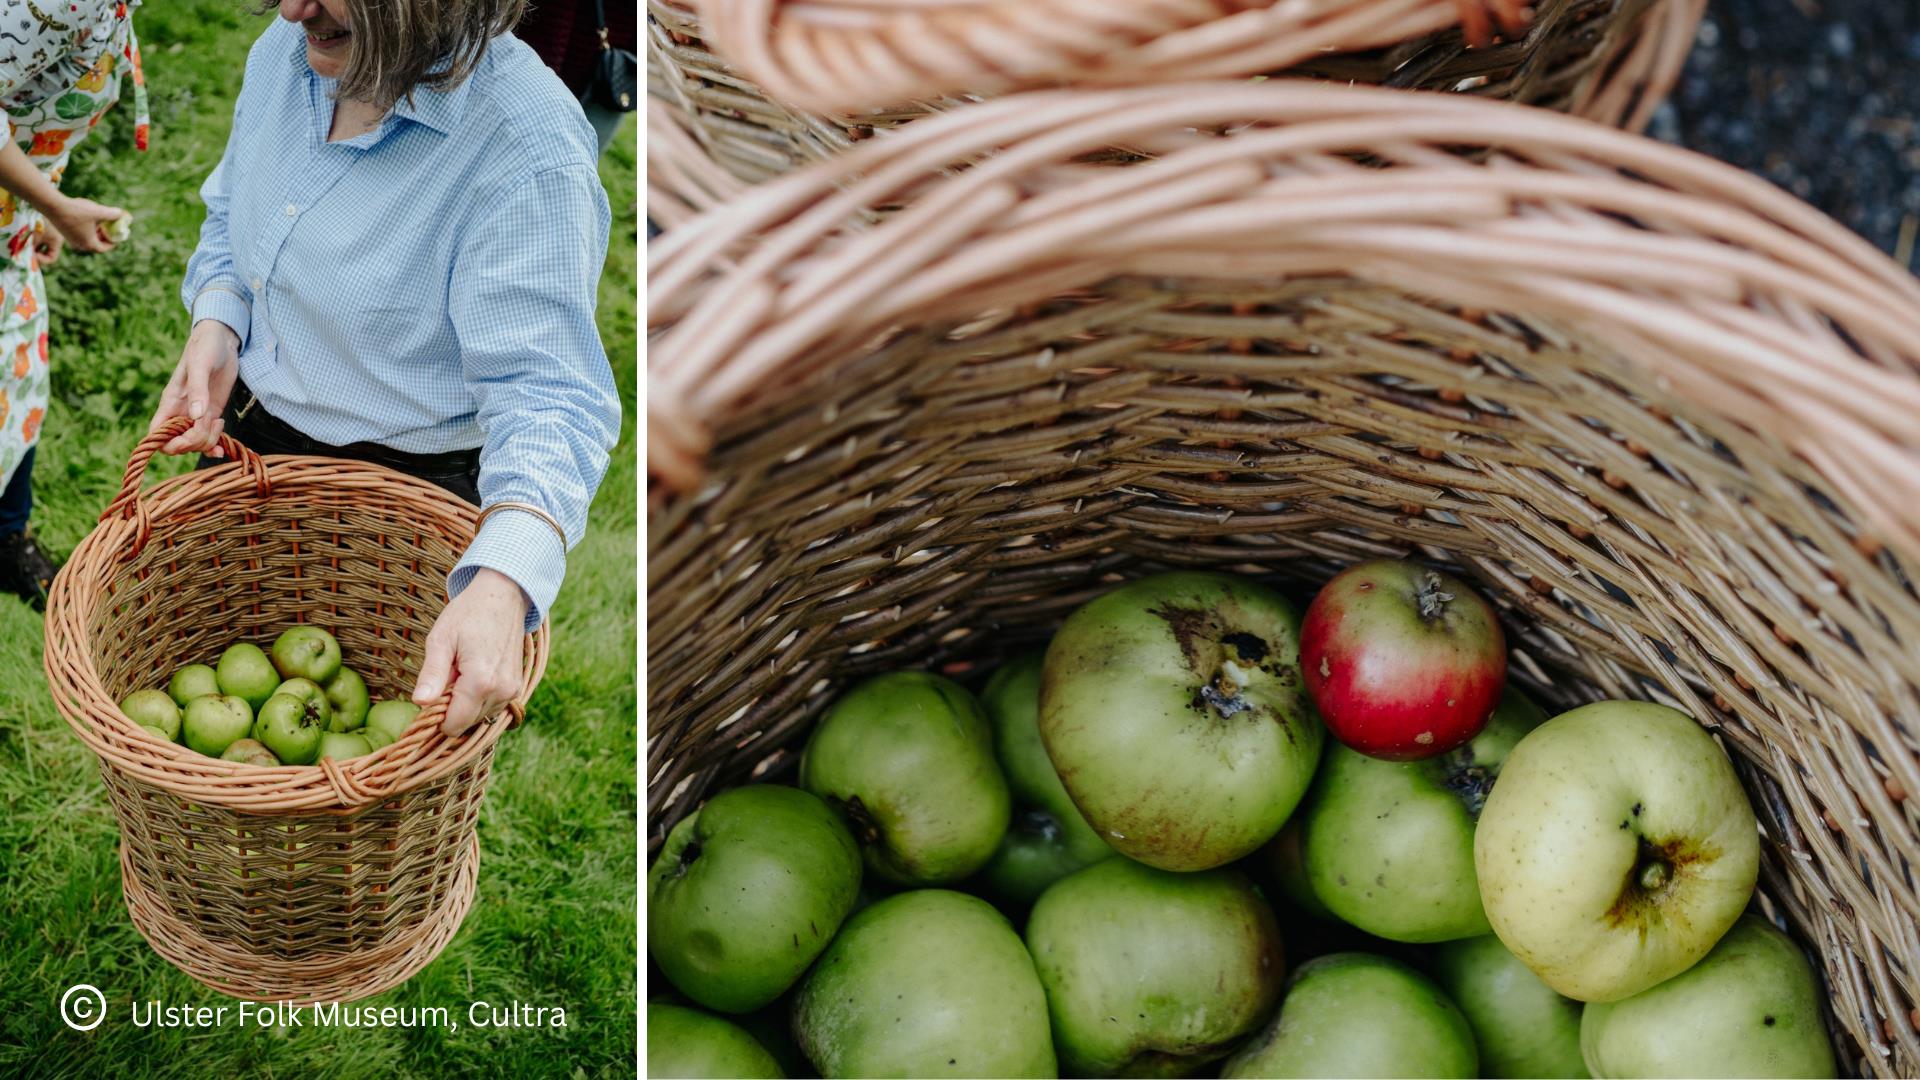 Apples being collected from orchard in baskets